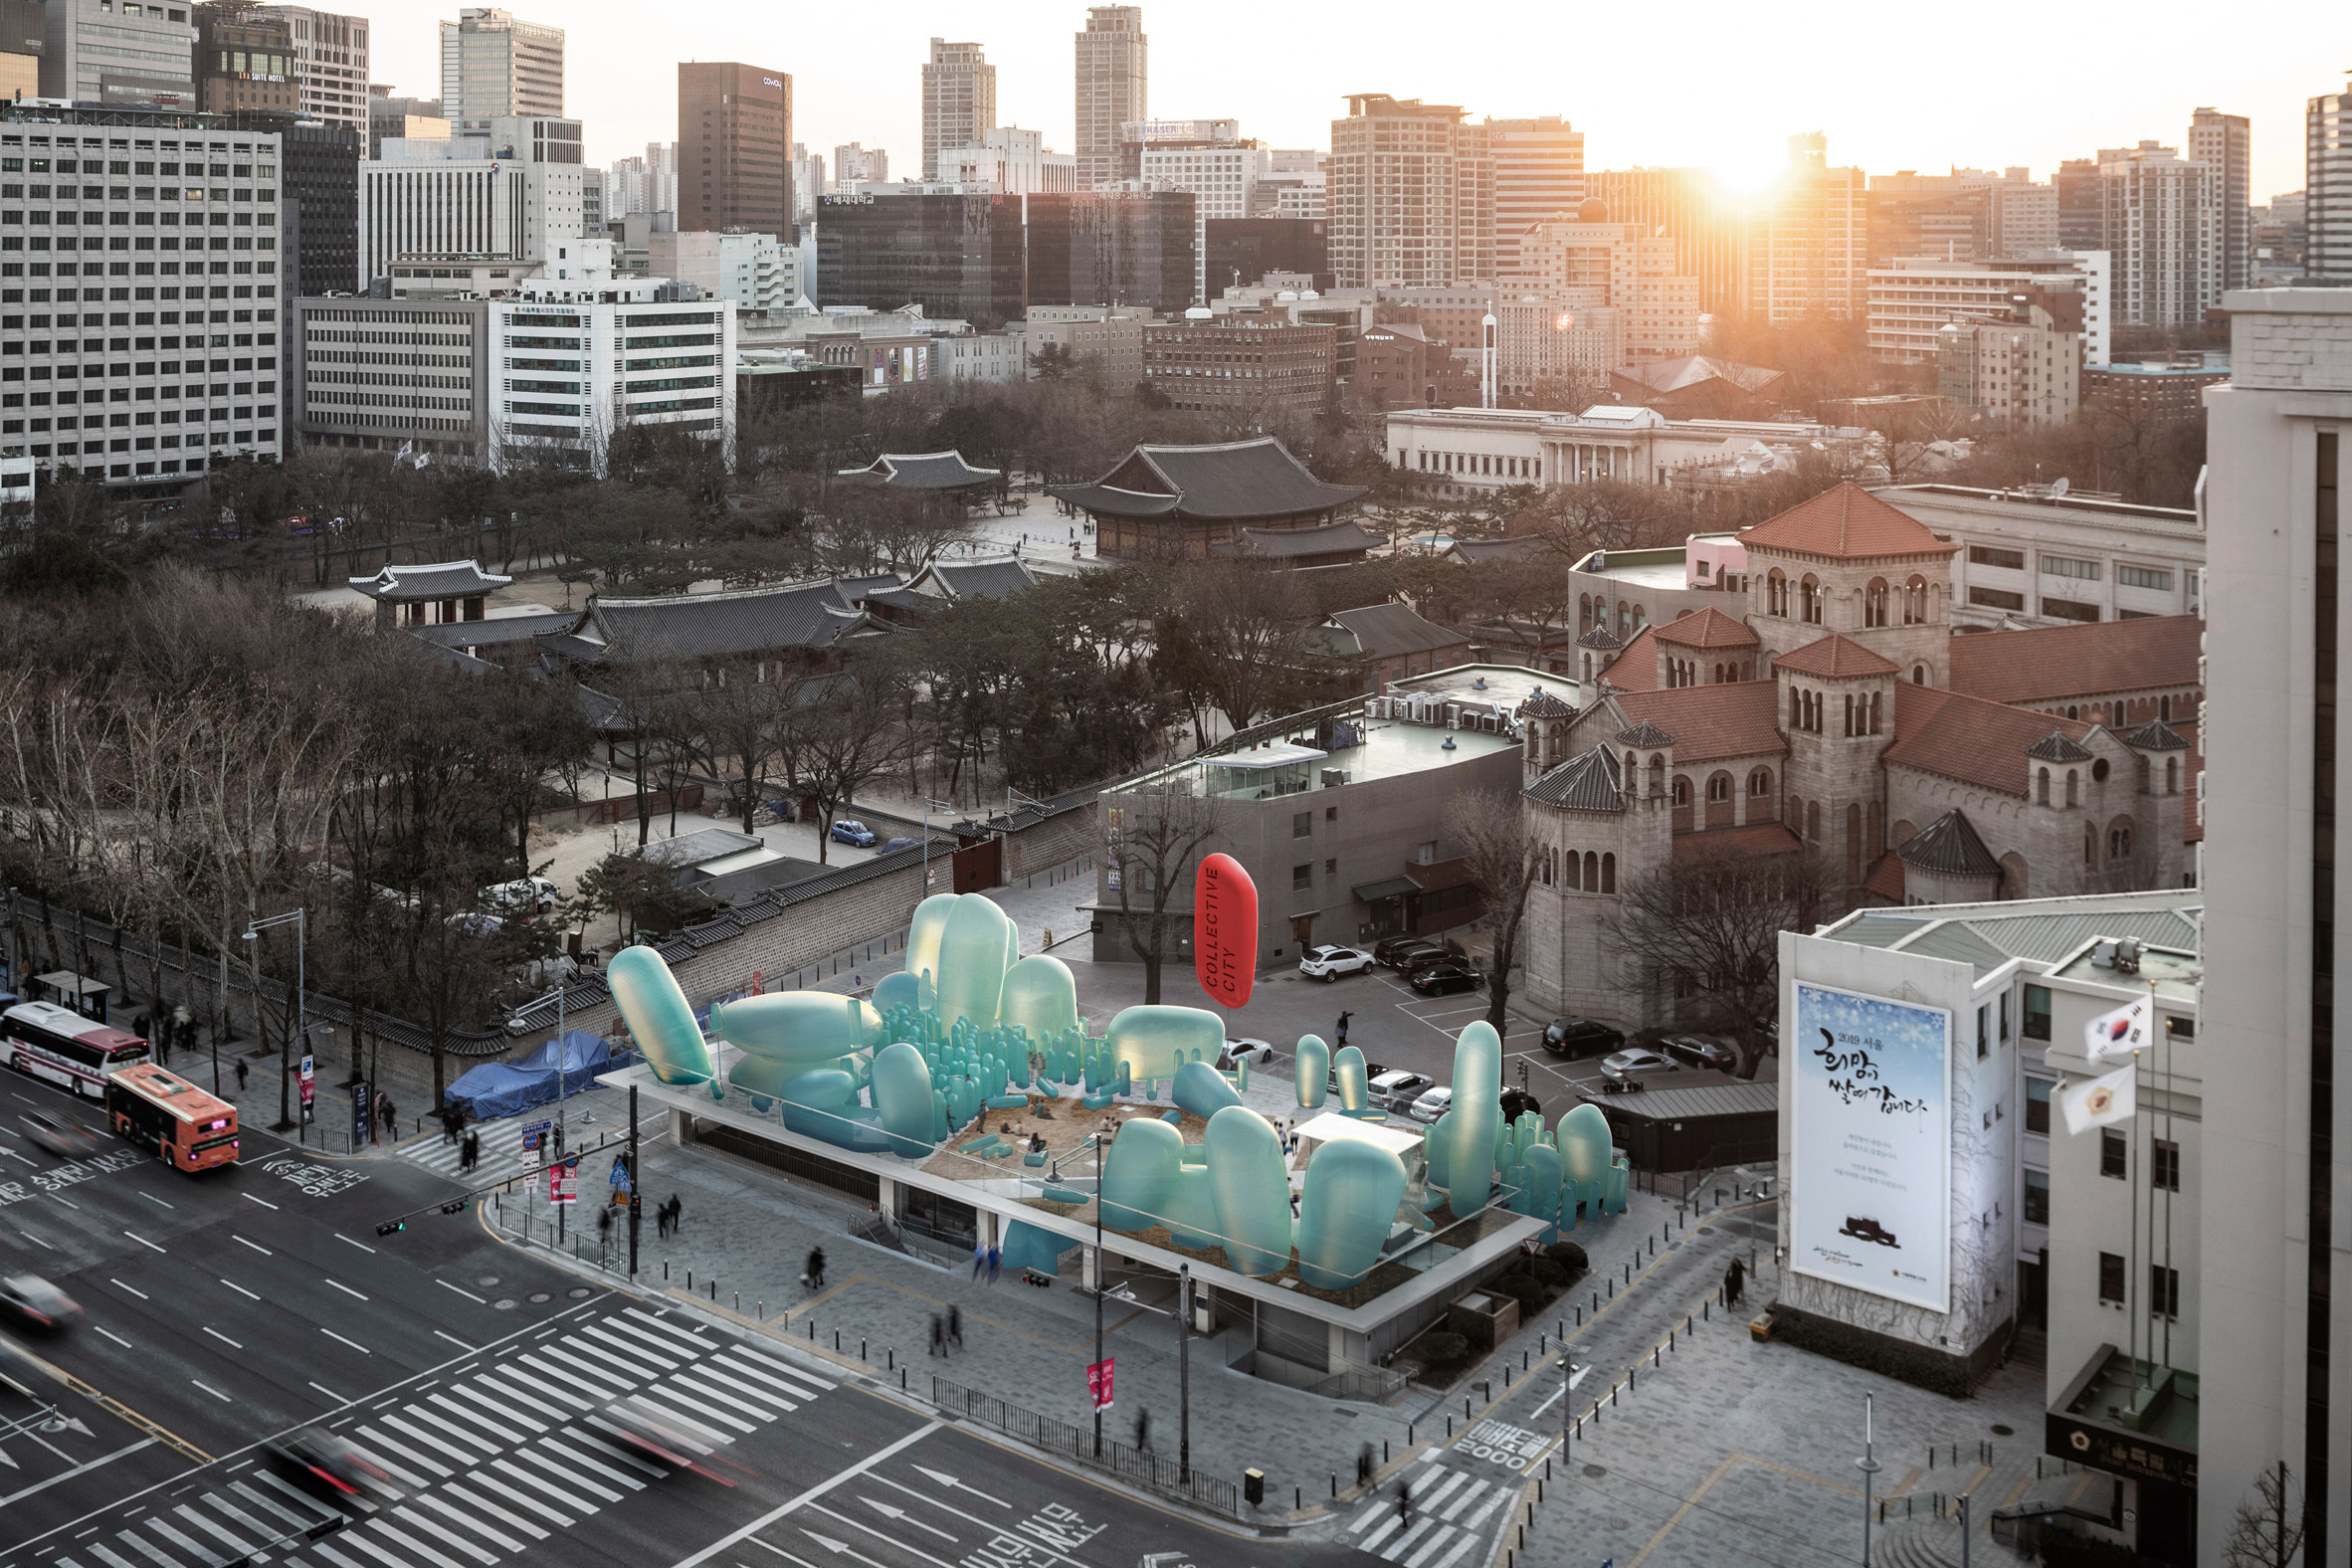 Inflatable Seoul garden by SKNYPL